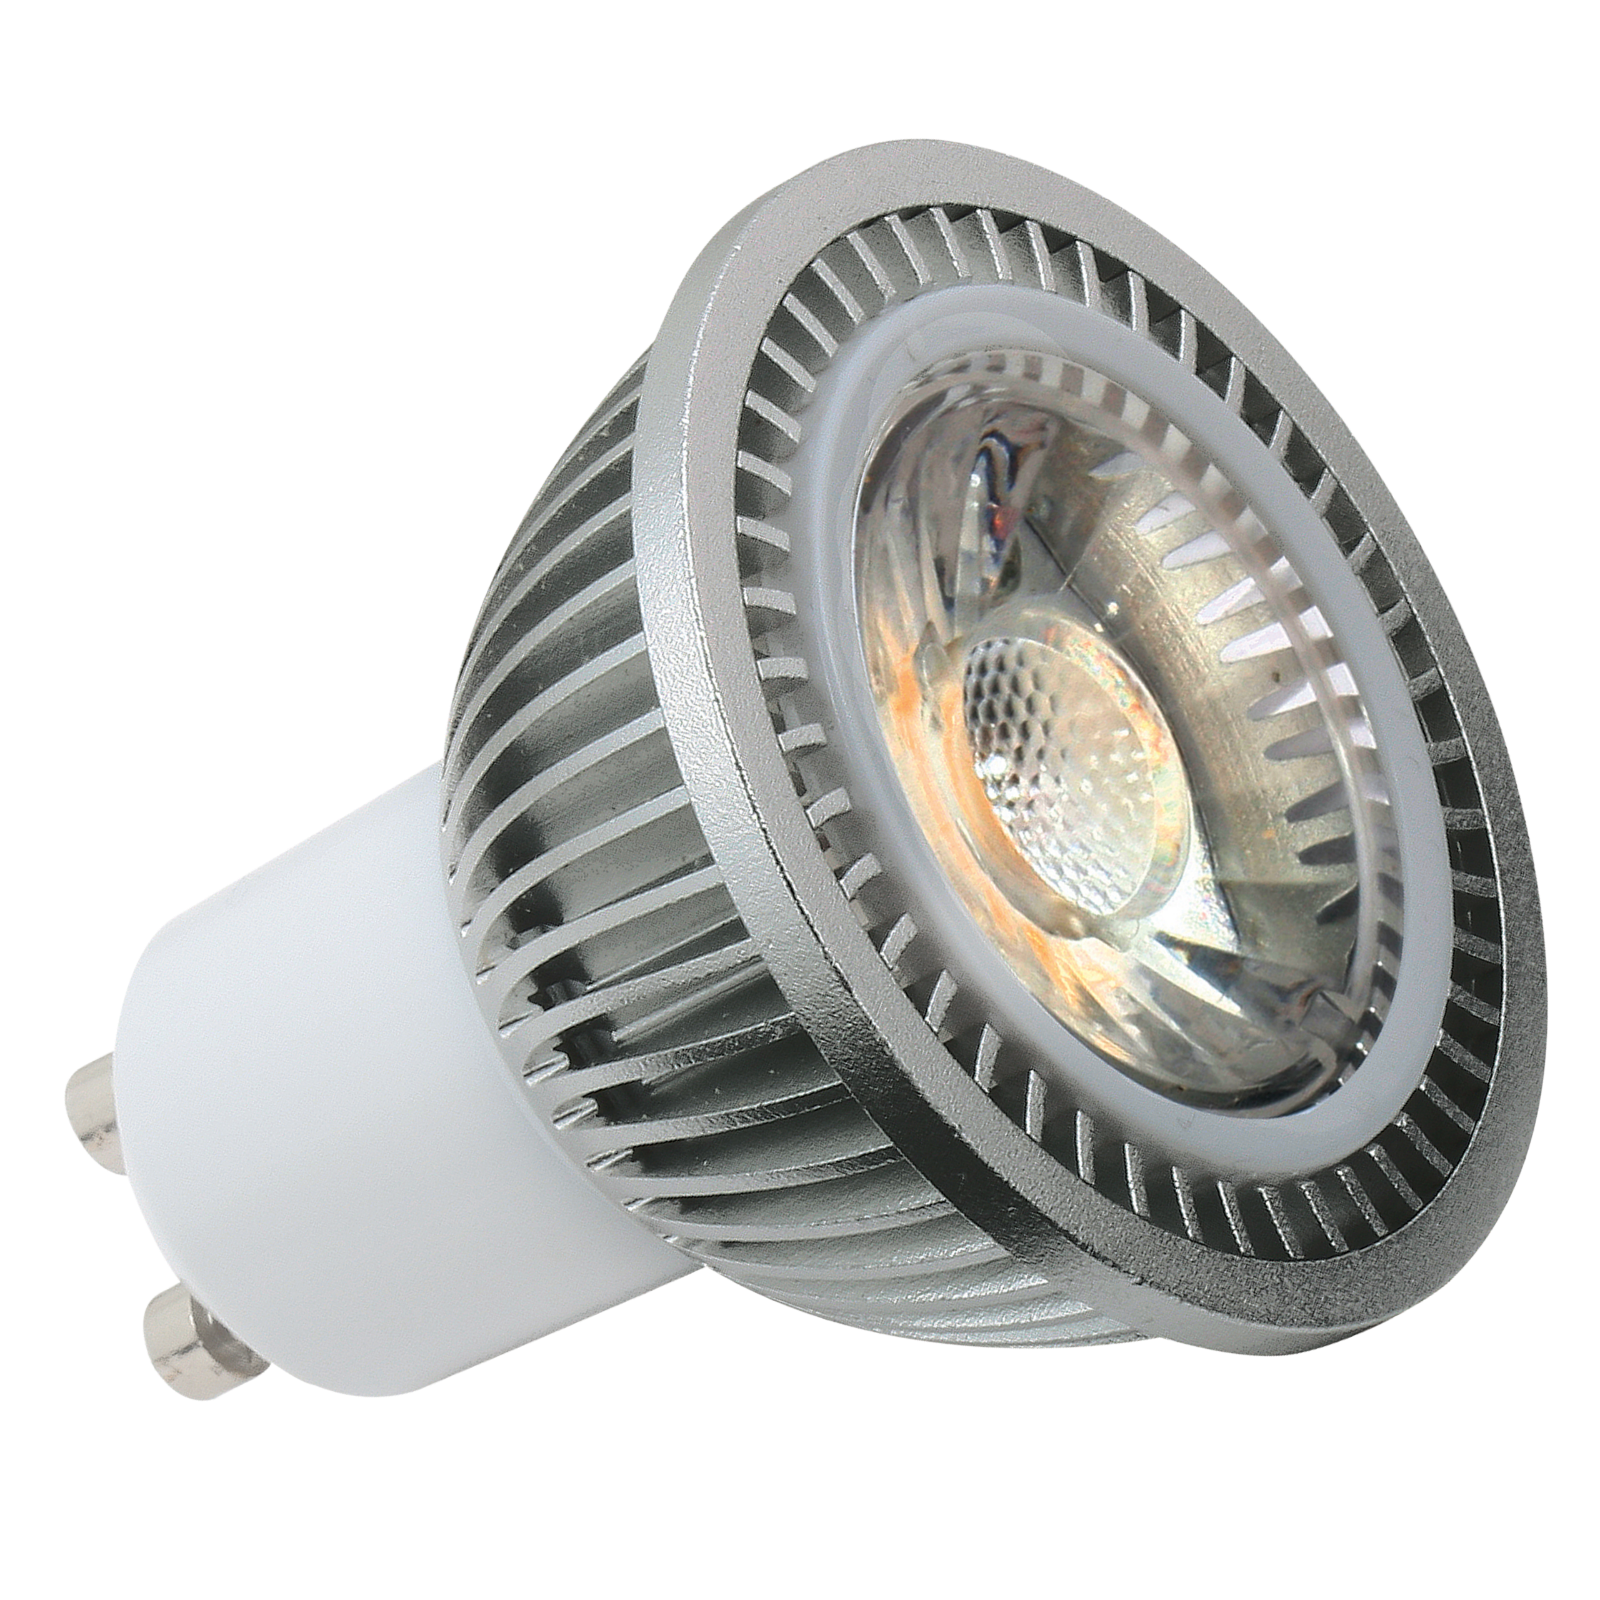 230V 5W GU10 COB LED 3000K Warm White 400 Lumens (dimmable) - GUCOB5WW - SOLD-OUT!! 